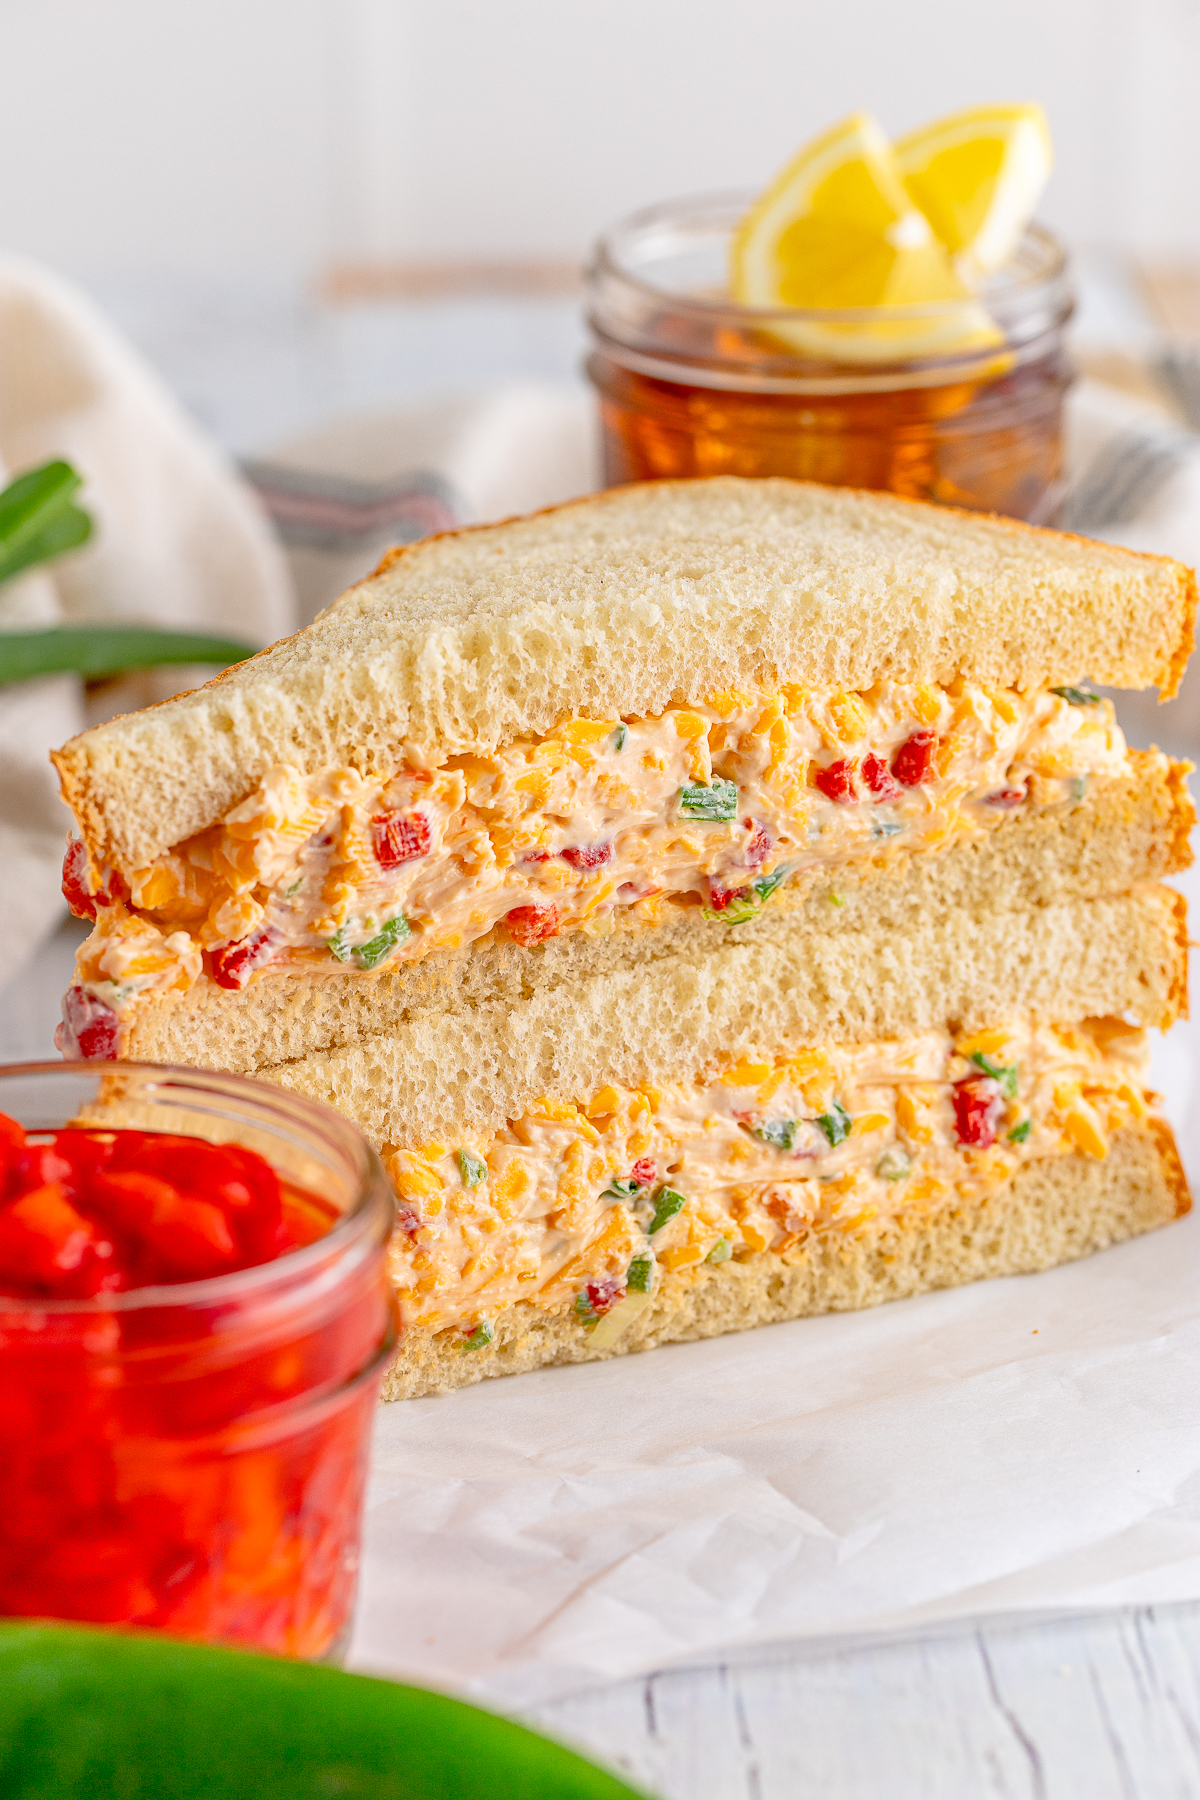 Sandwich with Pimento Cheese Recipe split in half showing filling.